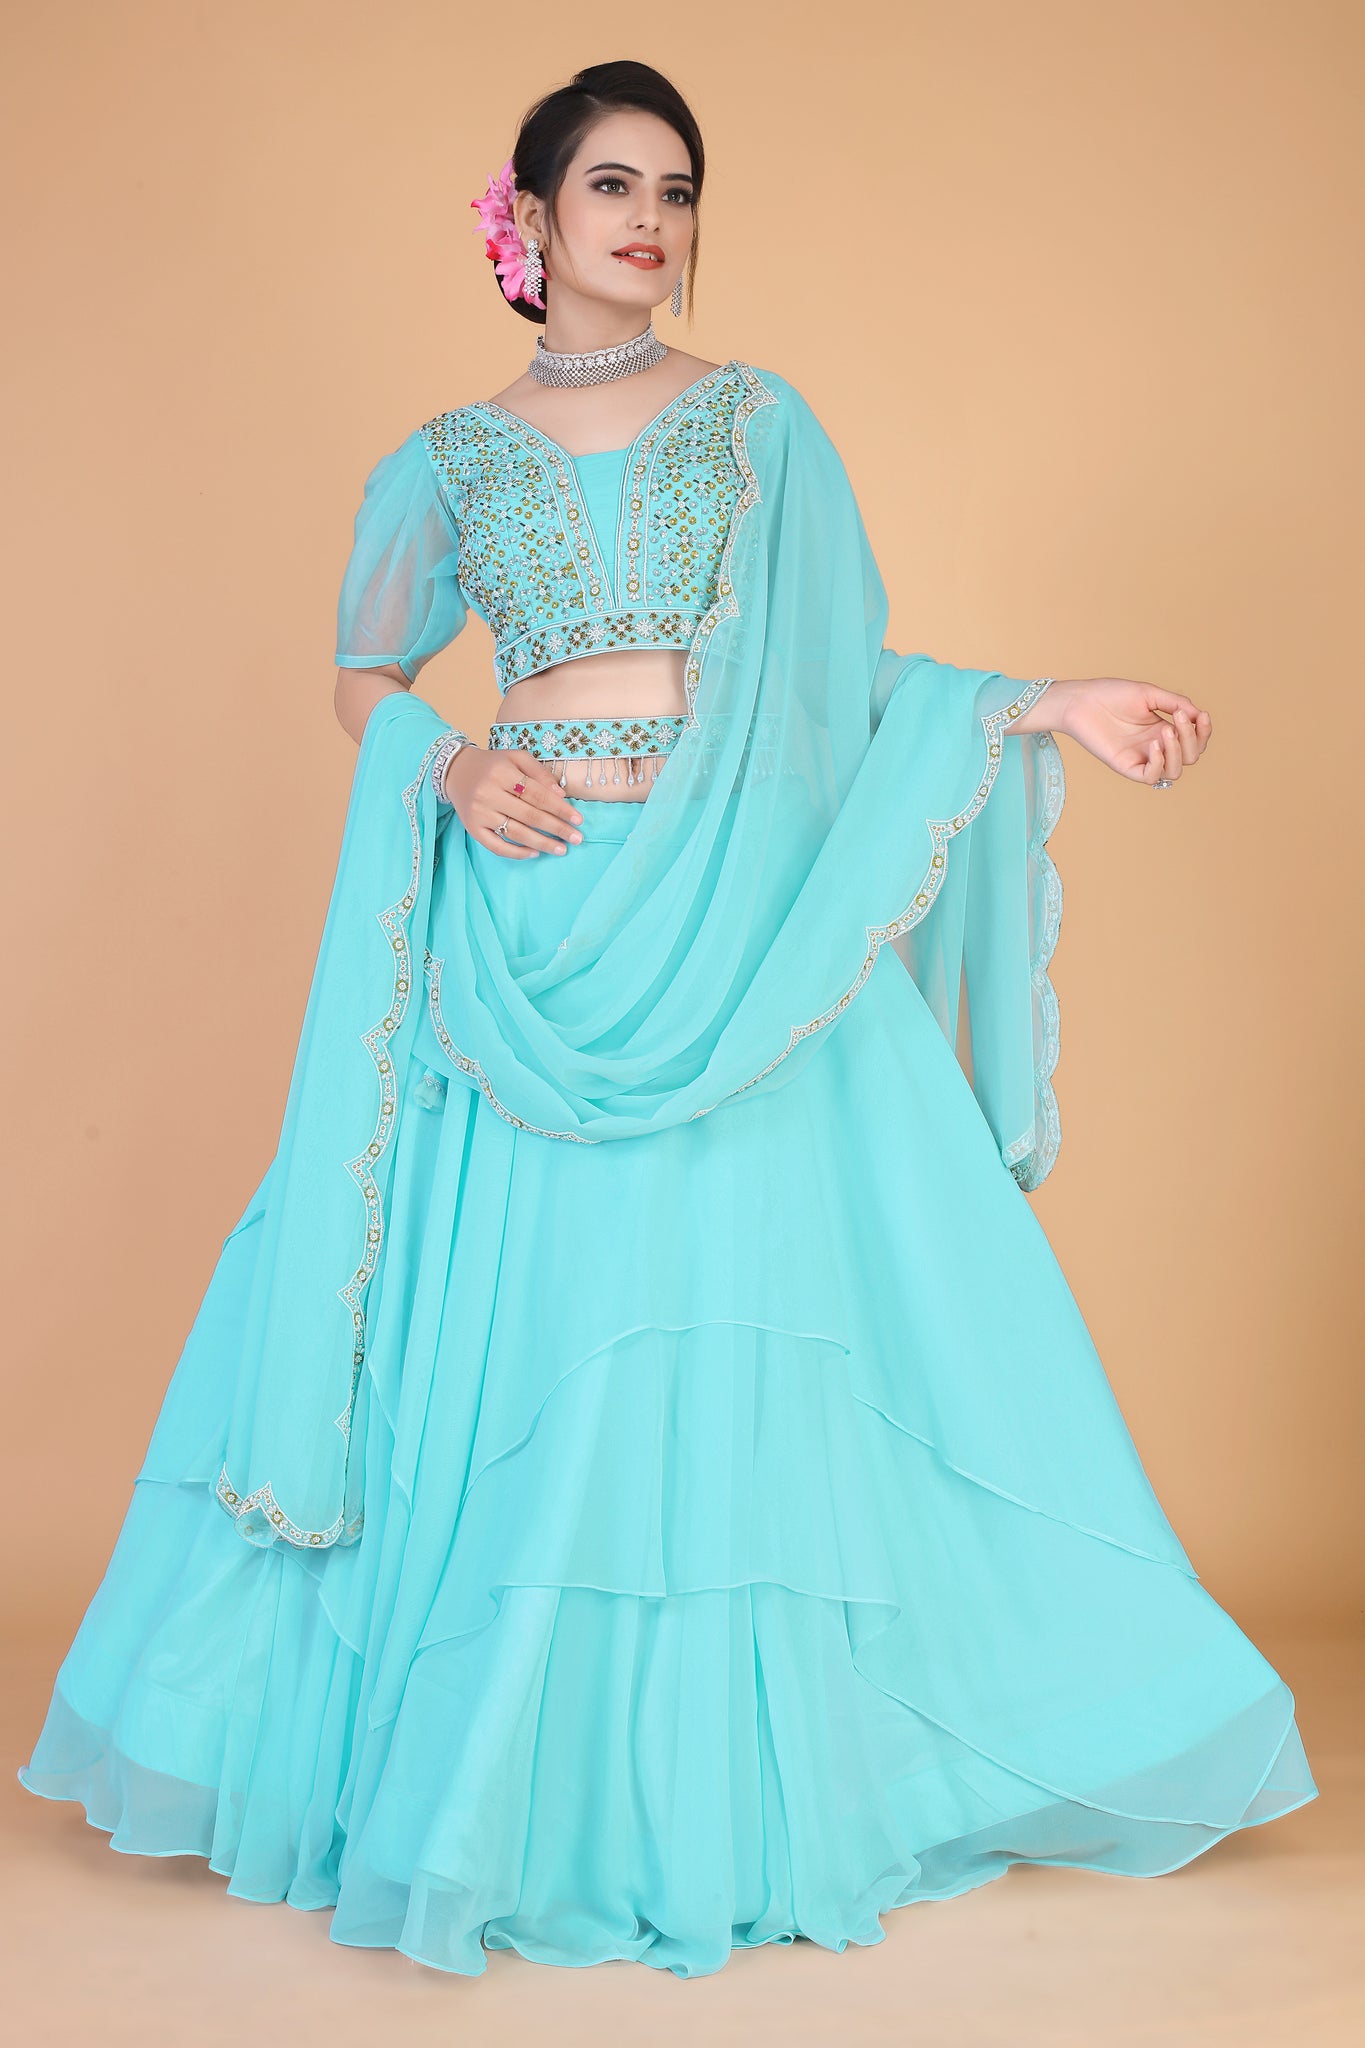 This lehenga made with netted fabric, embroidery mirror work and beads |  Mirror work dress, Lehenga designs simple, Party wear indian dresses